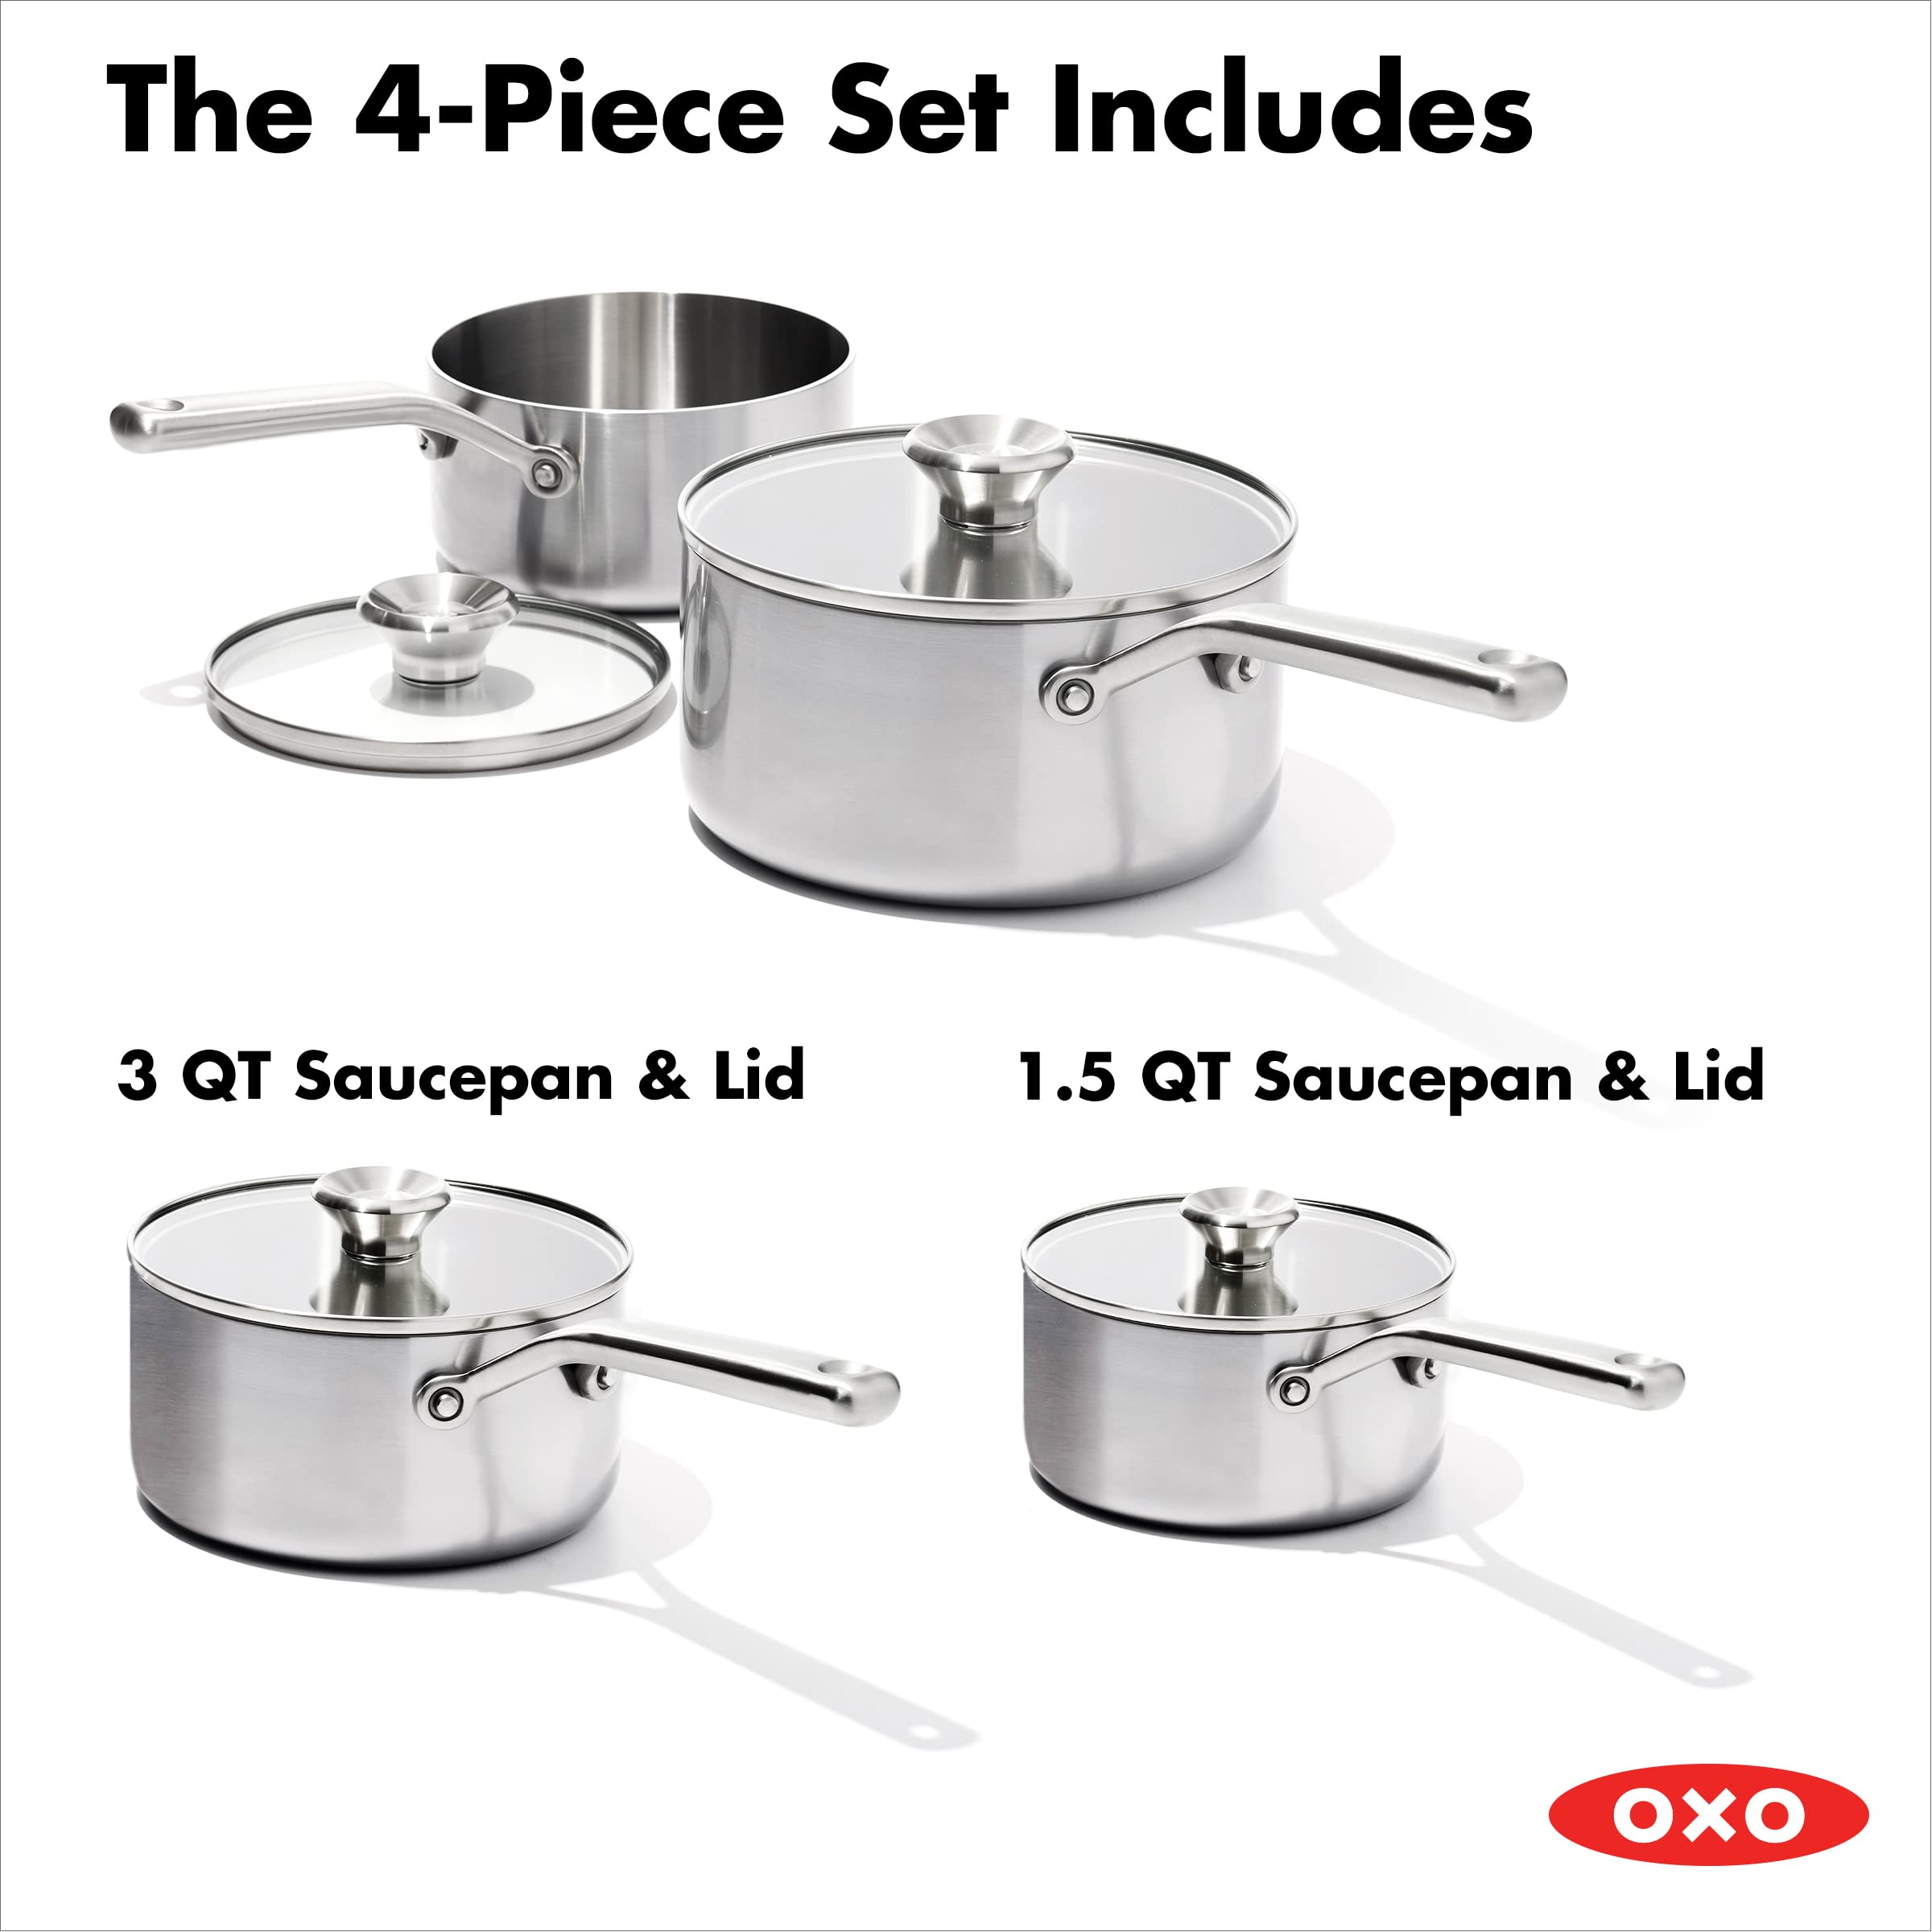 OXO Mira Tri-Ply Stainless Steel, 1.5QT and 3QT Saucepan Pot Set with Lids, Induction, Multi Clad, Dishwasher and Metal Utensil Safe